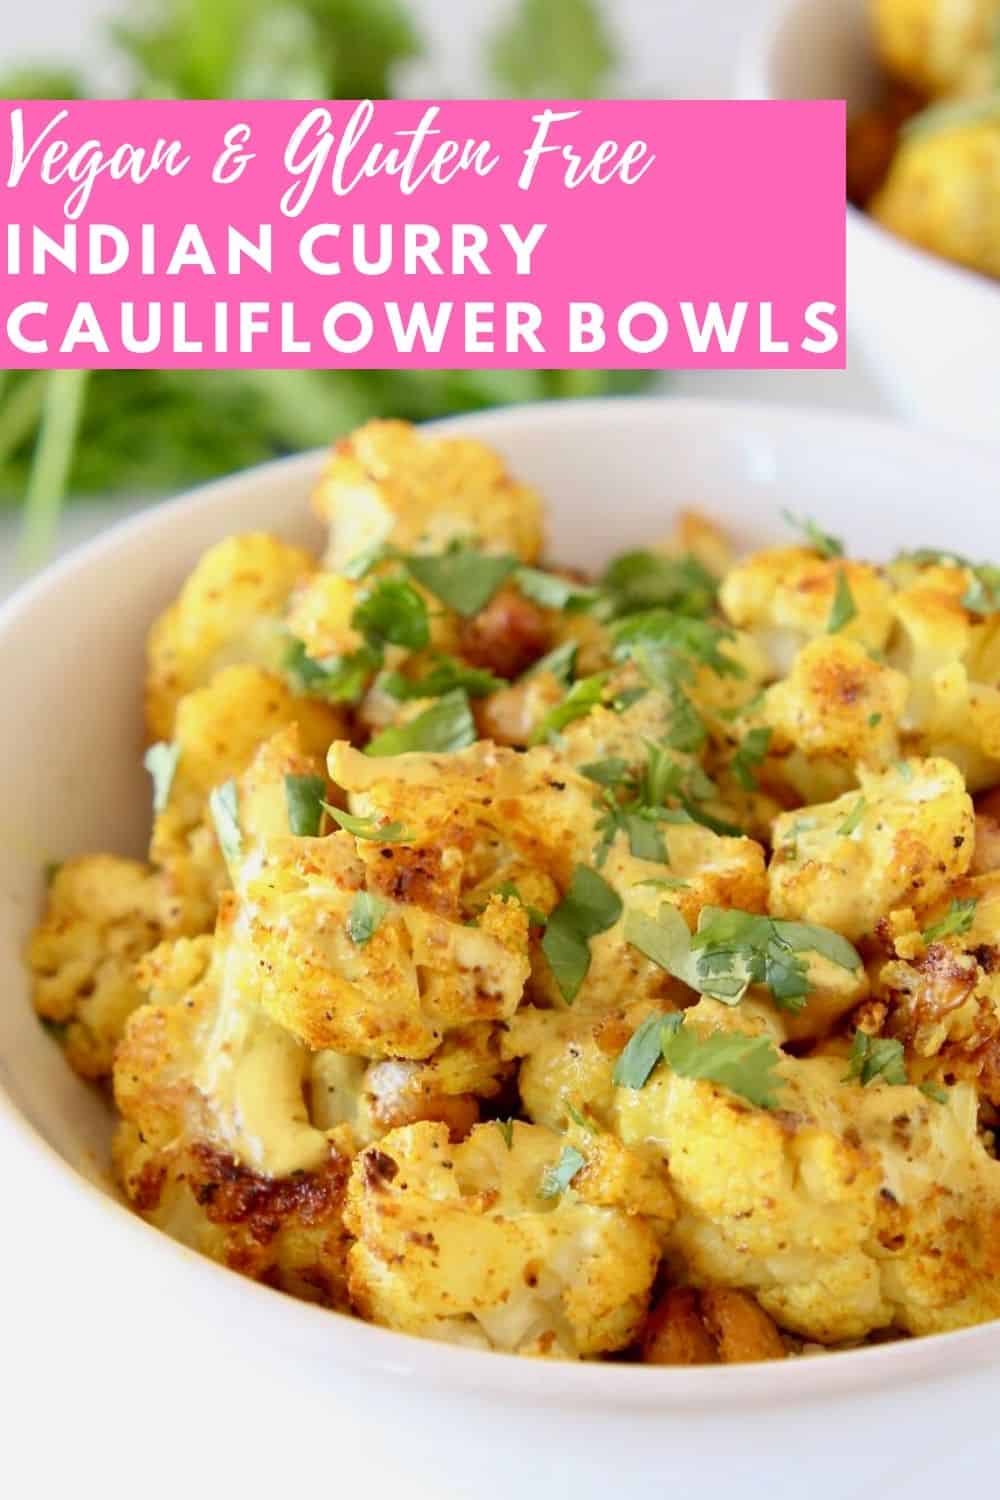 Roasted Indian Cauliflower Bowl - Bowls Are The New Plates